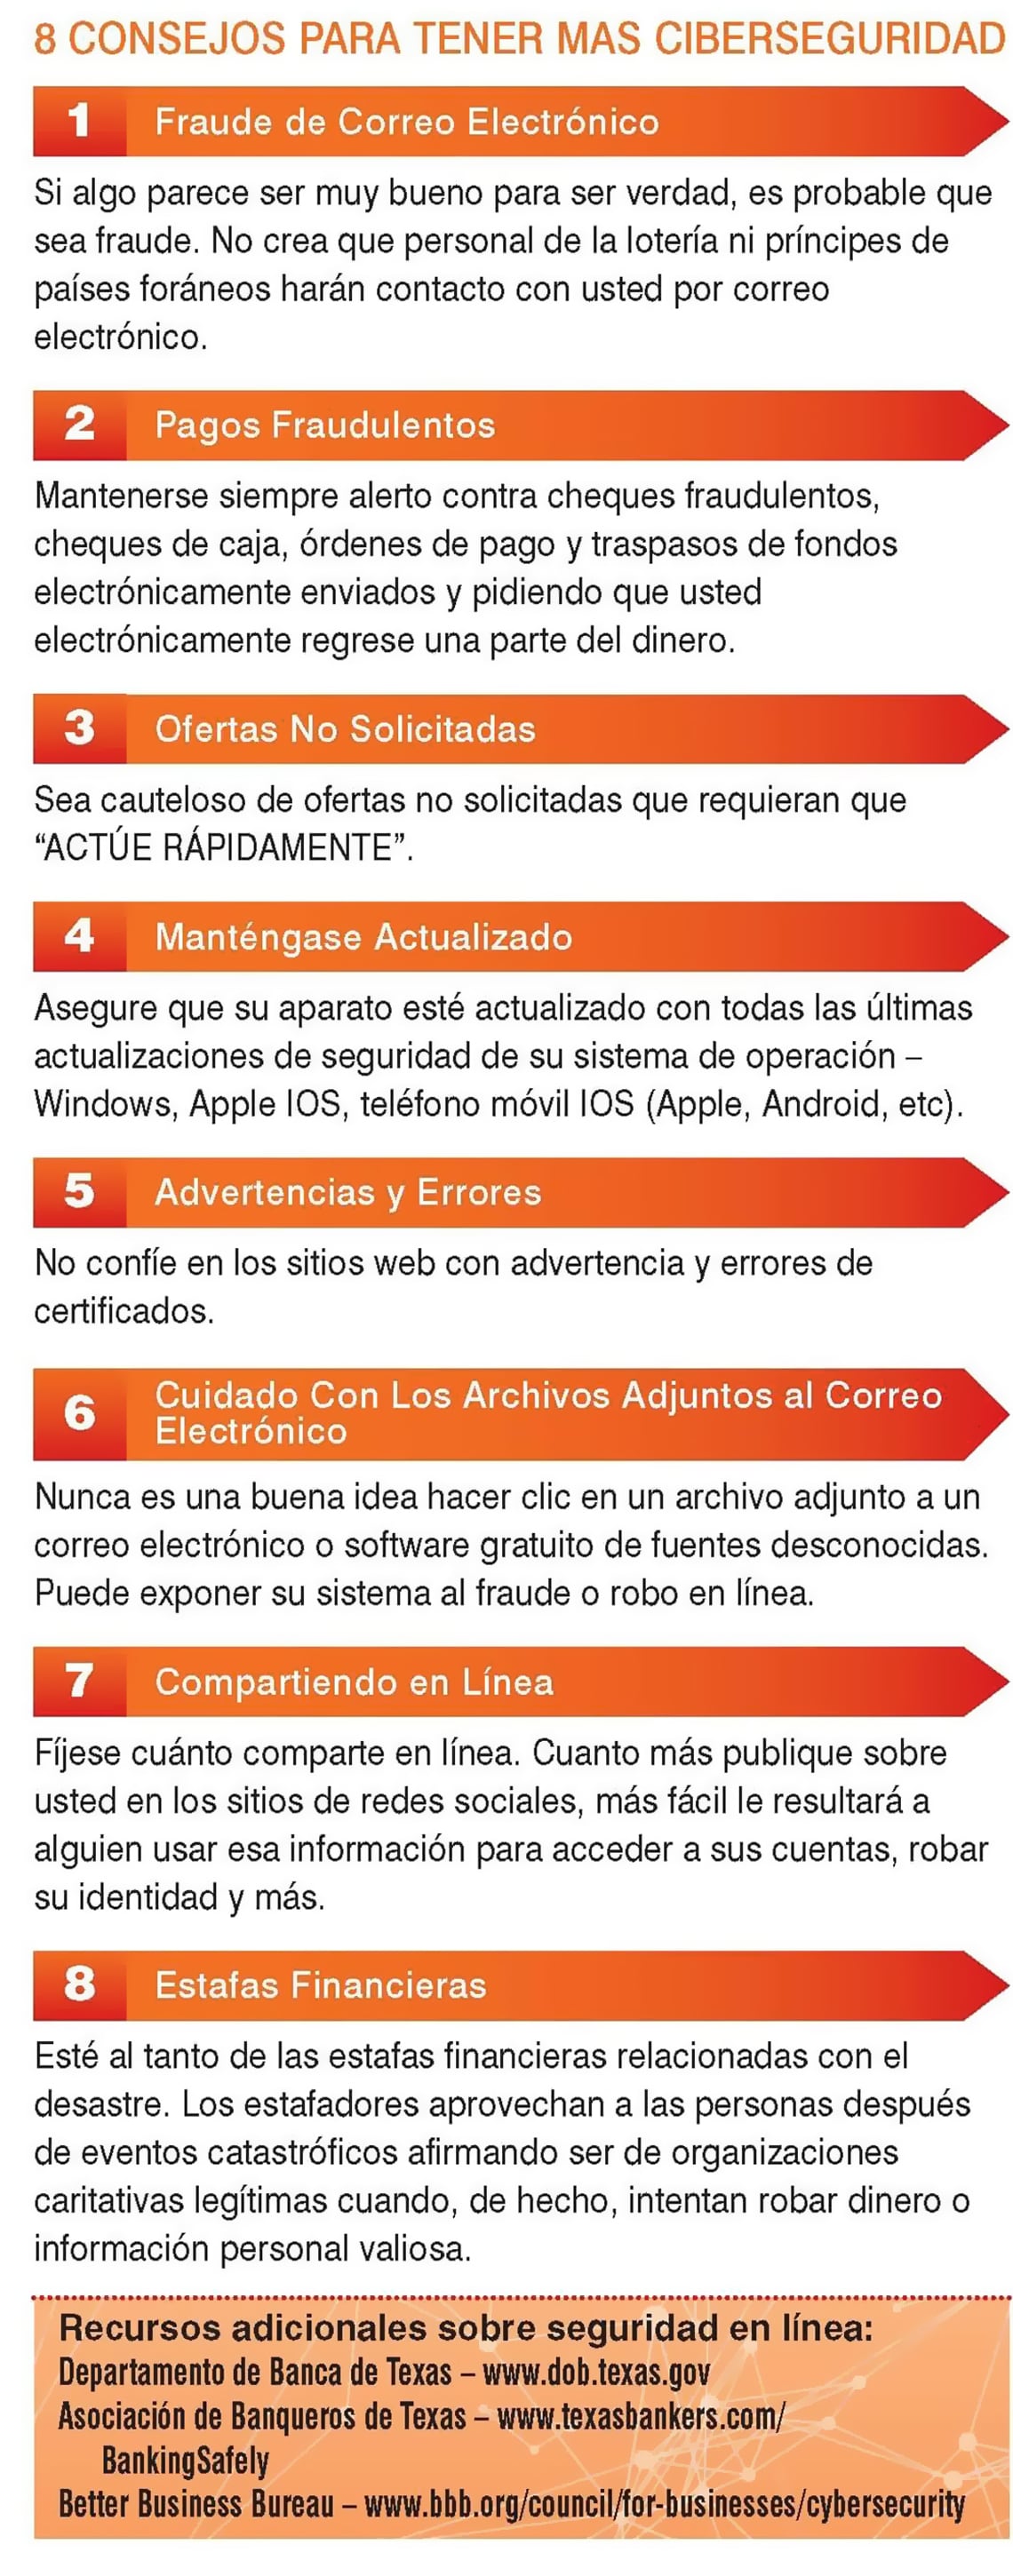 8 Tips to be more cybersecure - Spanish